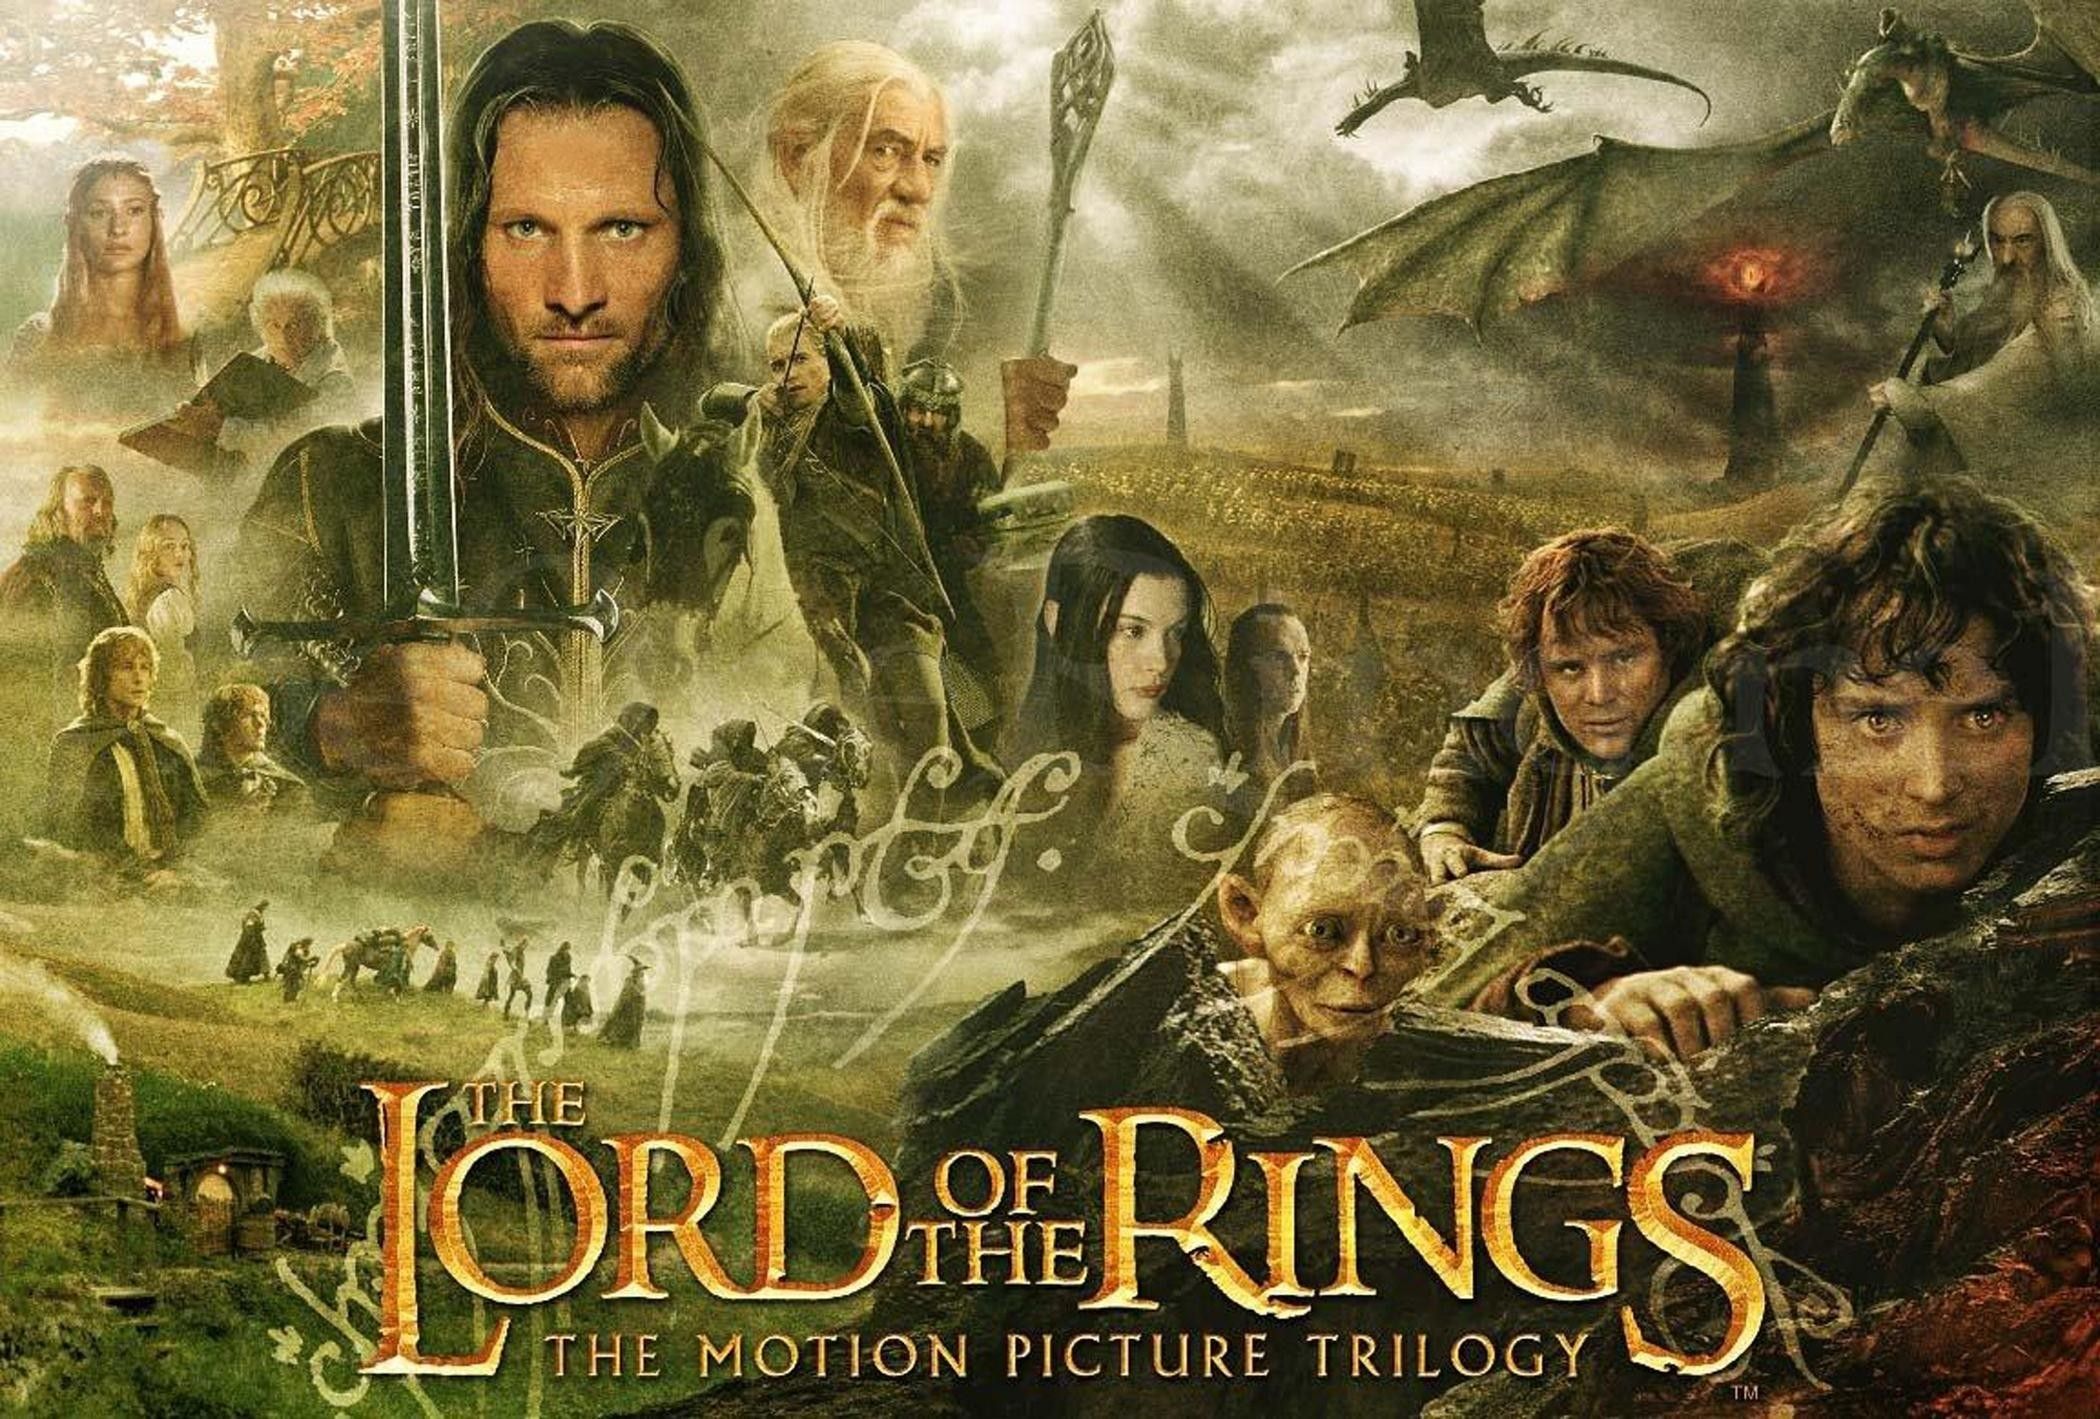 The Lord Of The Rings #408680 | Full HD Widescreen wallpapers for ...